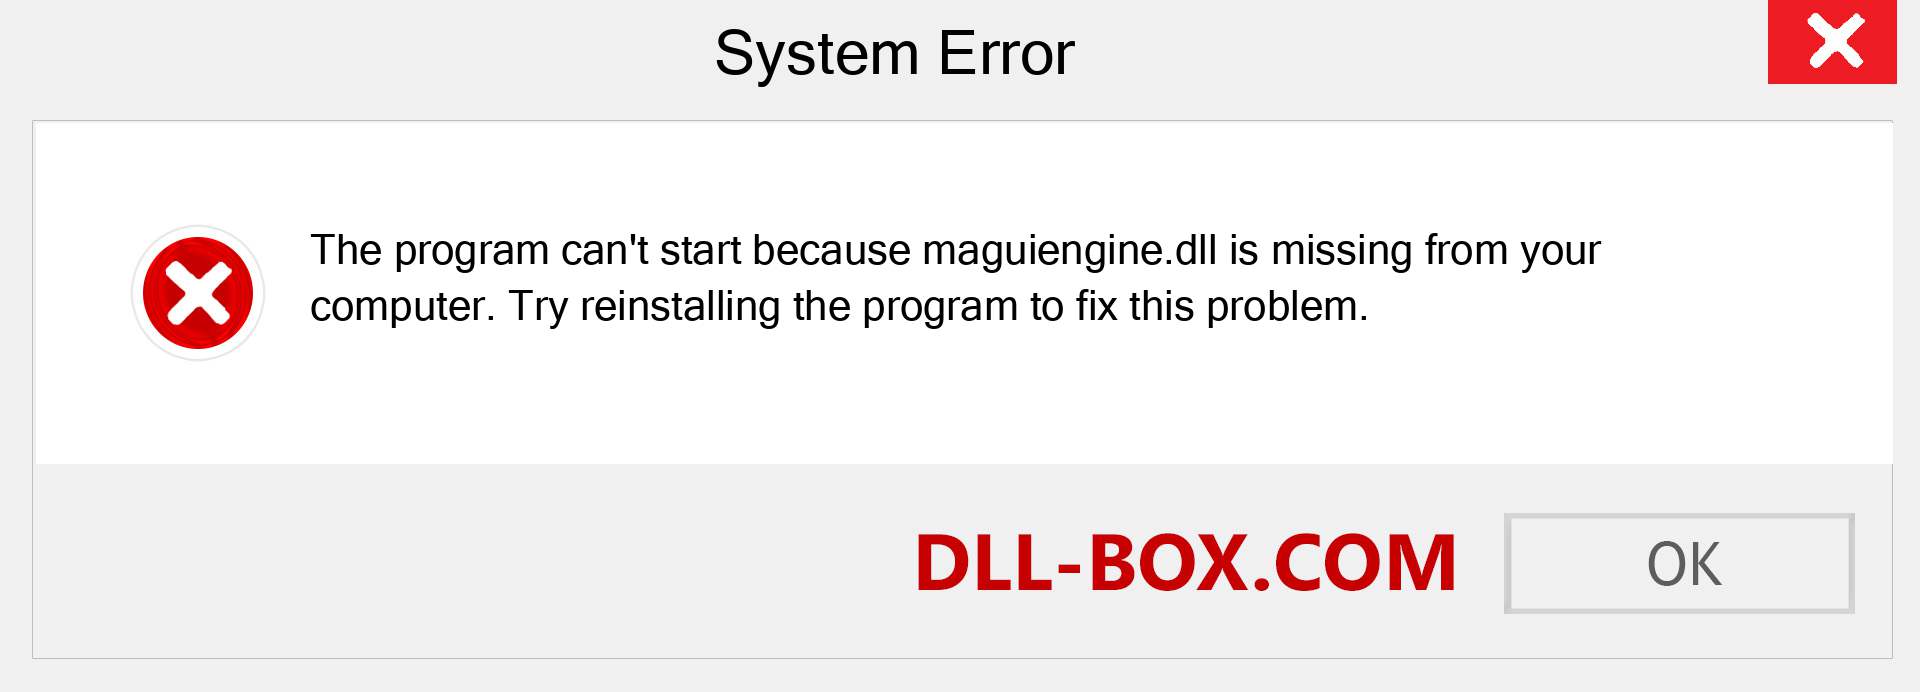  maguiengine.dll file is missing?. Download for Windows 7, 8, 10 - Fix  maguiengine dll Missing Error on Windows, photos, images